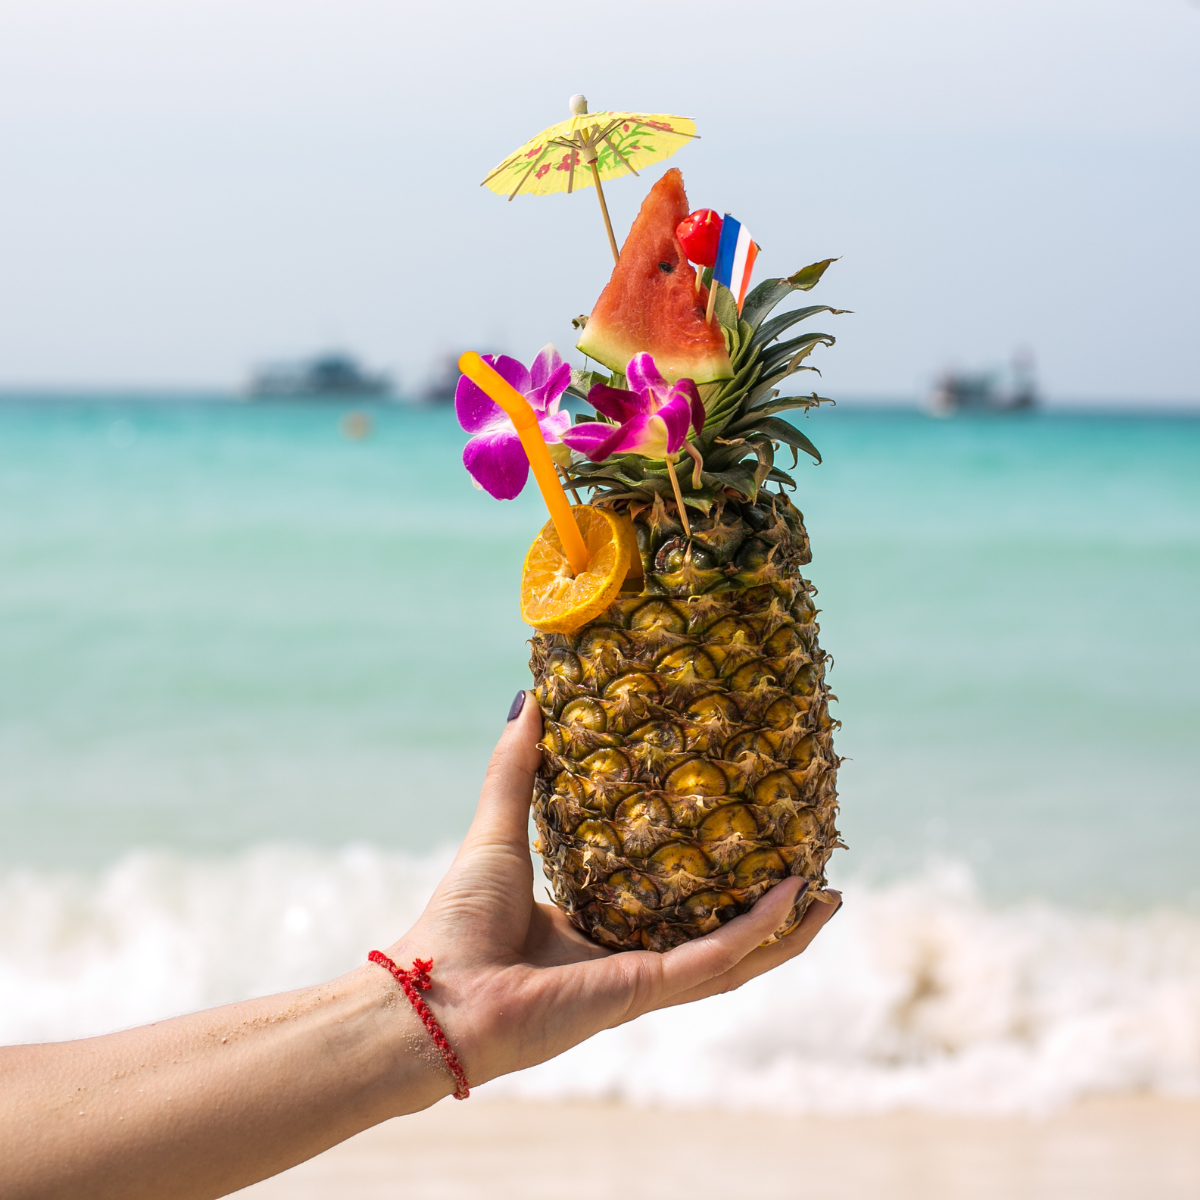 Pine apple in a Hand: Featured In Upside Down Pineapple Symbol & Meaning on a Cruise